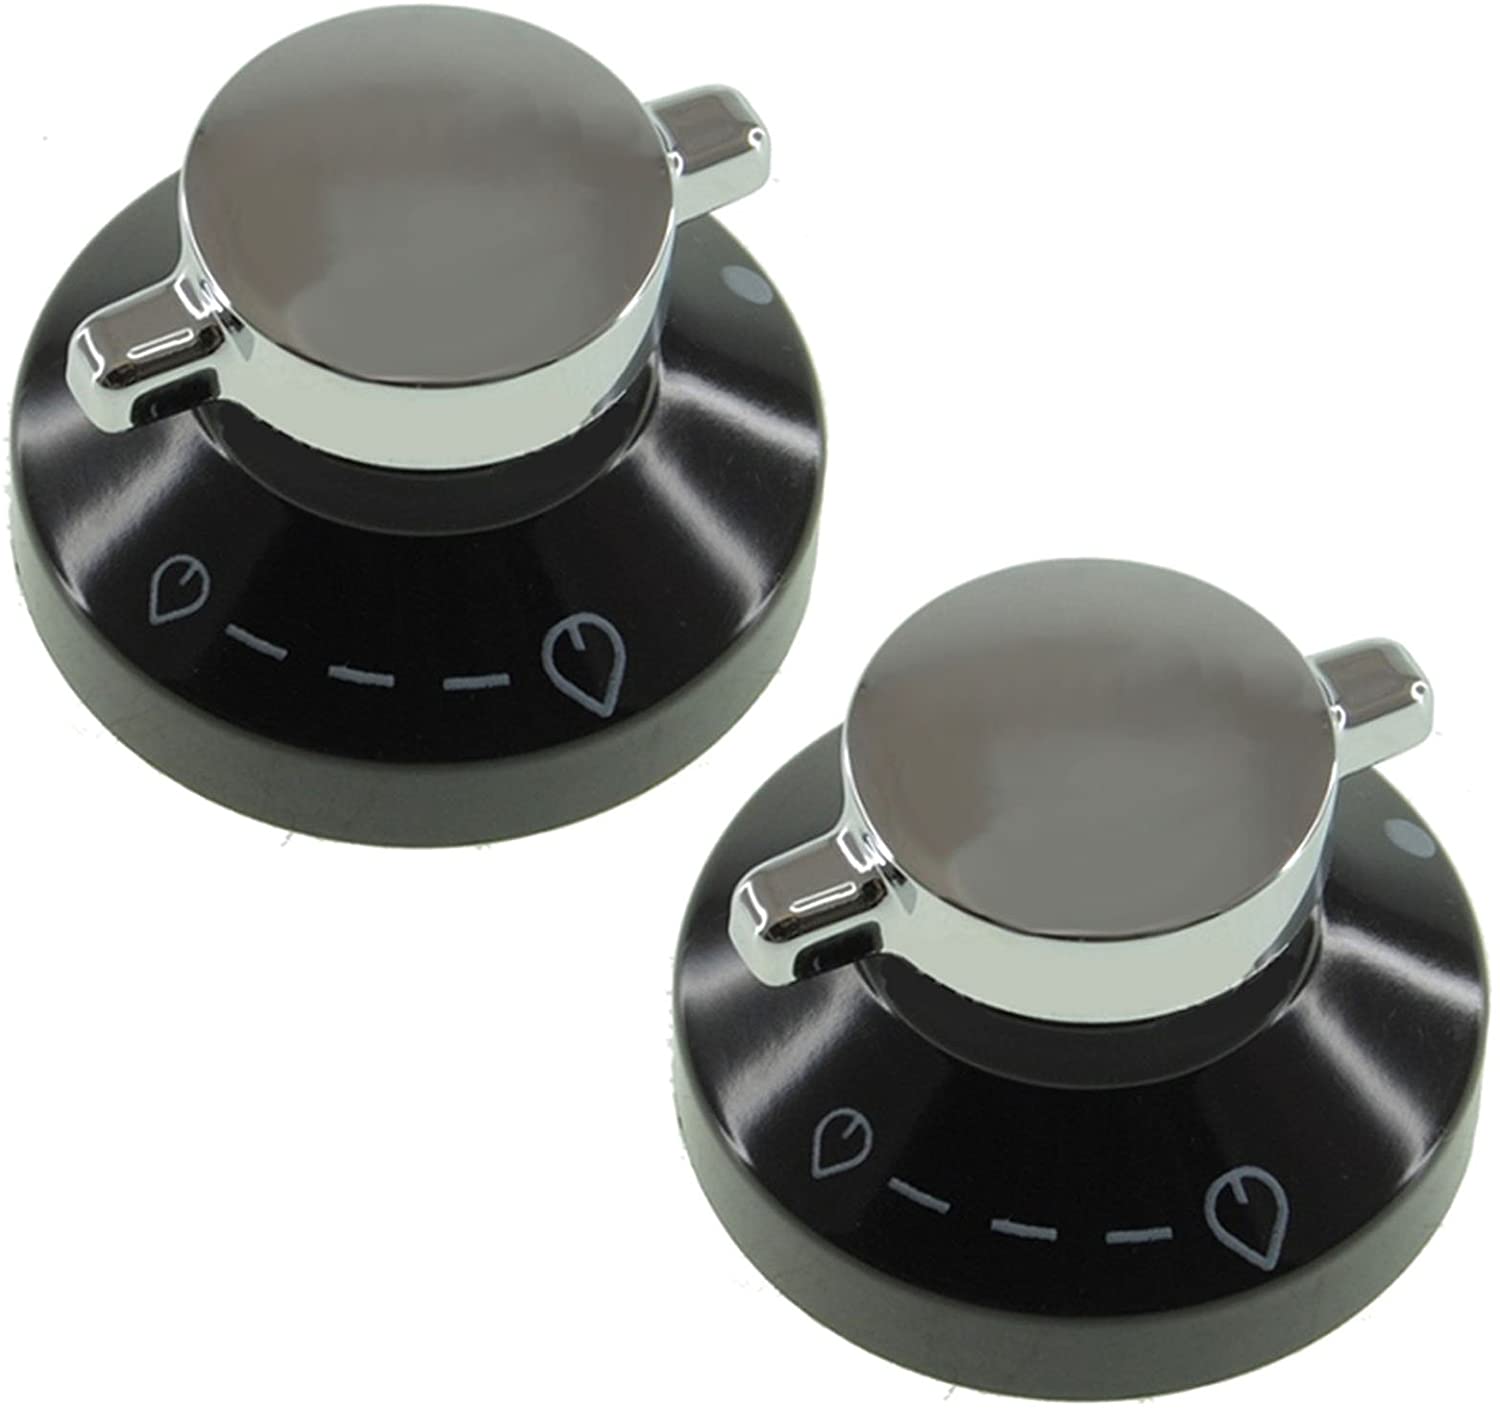 2 x Black Silver Knob Switch for GLEN DIMPLEX Gas Oven Cooker Grill Hob